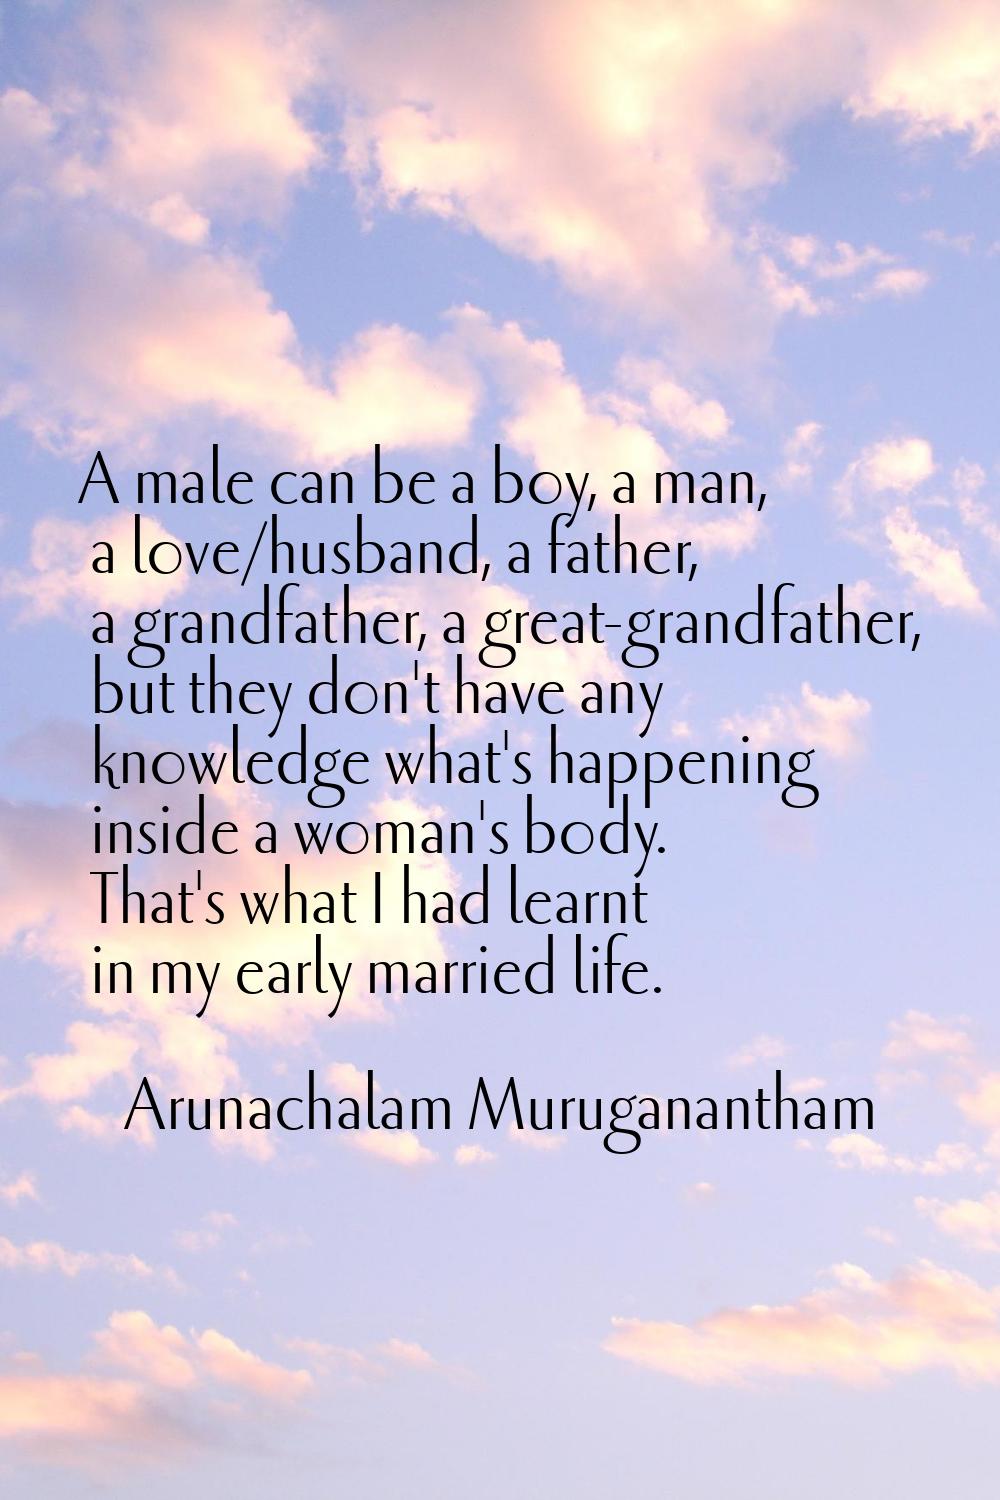 A male can be a boy, a man, a love/husband, a father, a grandfather, a great-grandfather, but they 